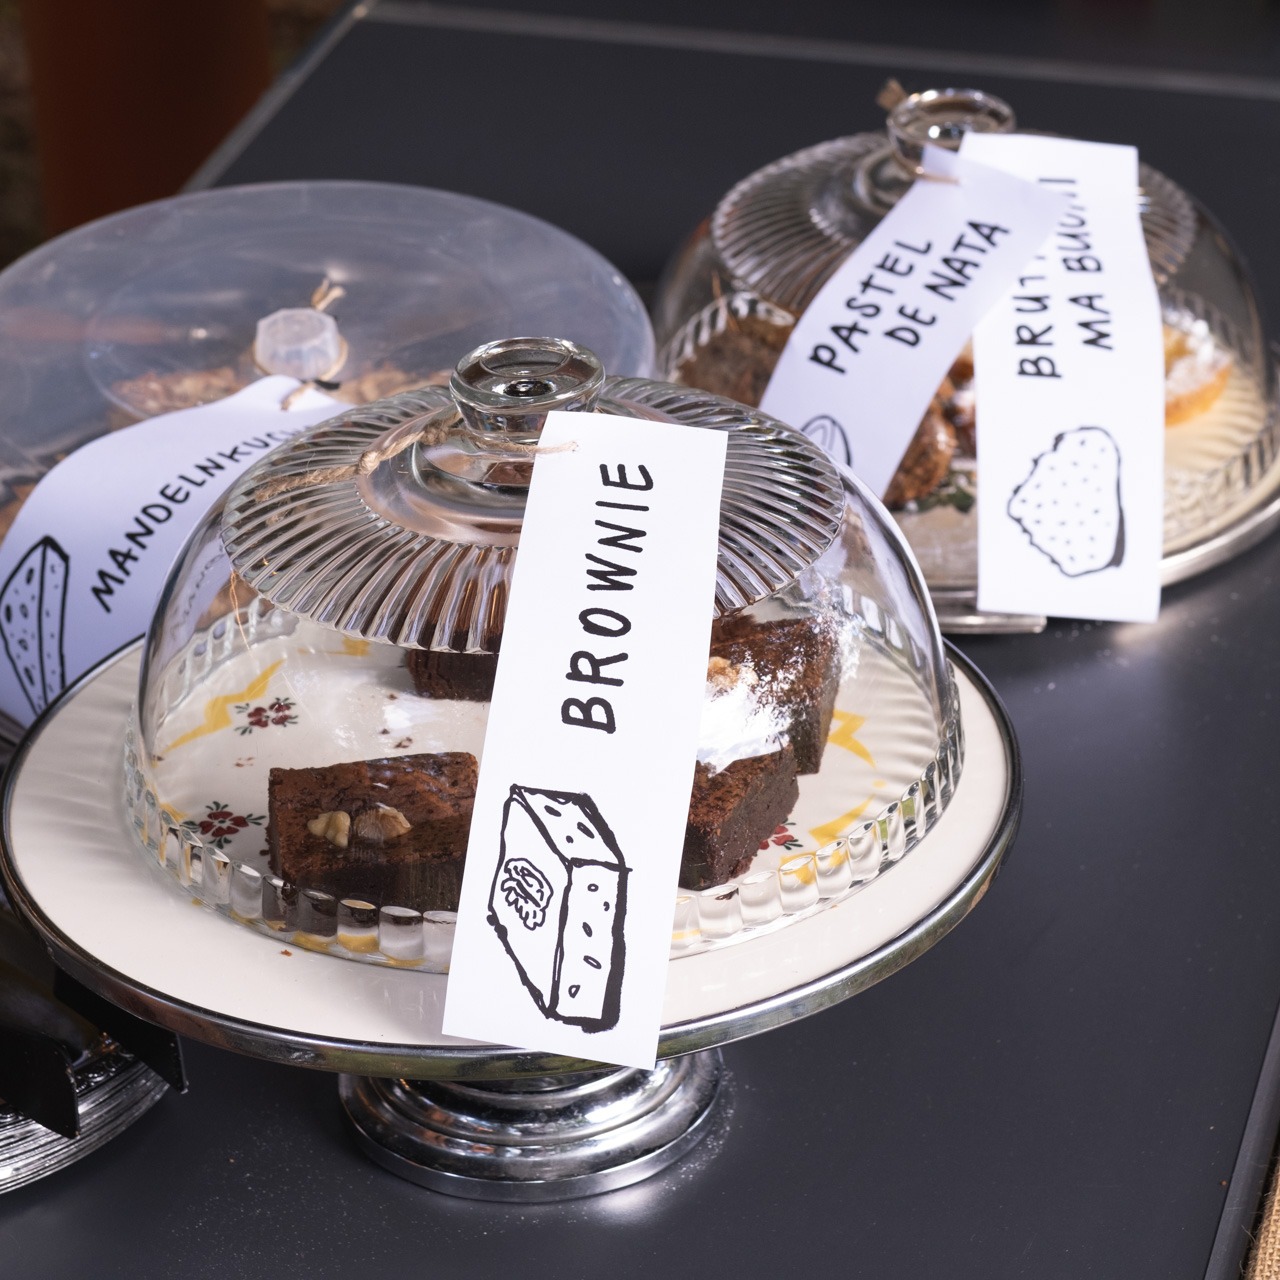 Cake display with labels